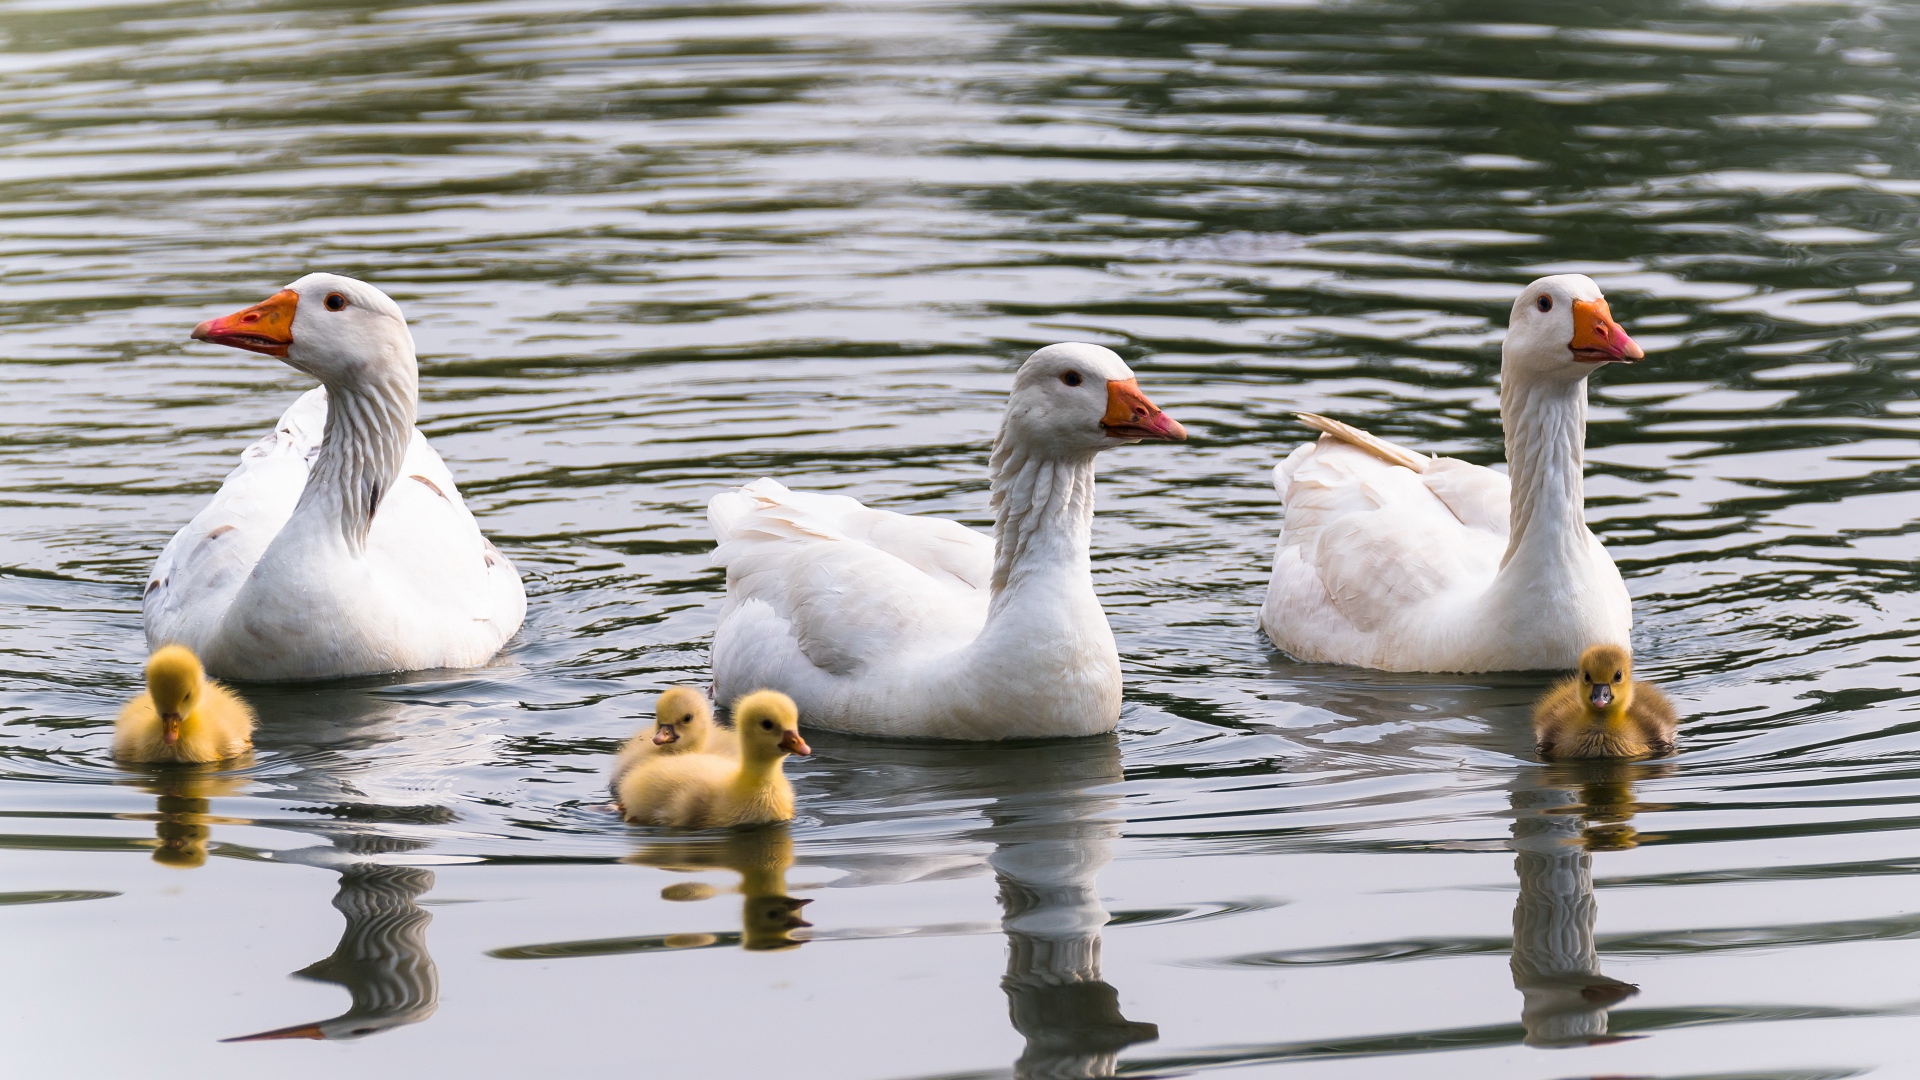 Three white geese with little chicks in the water